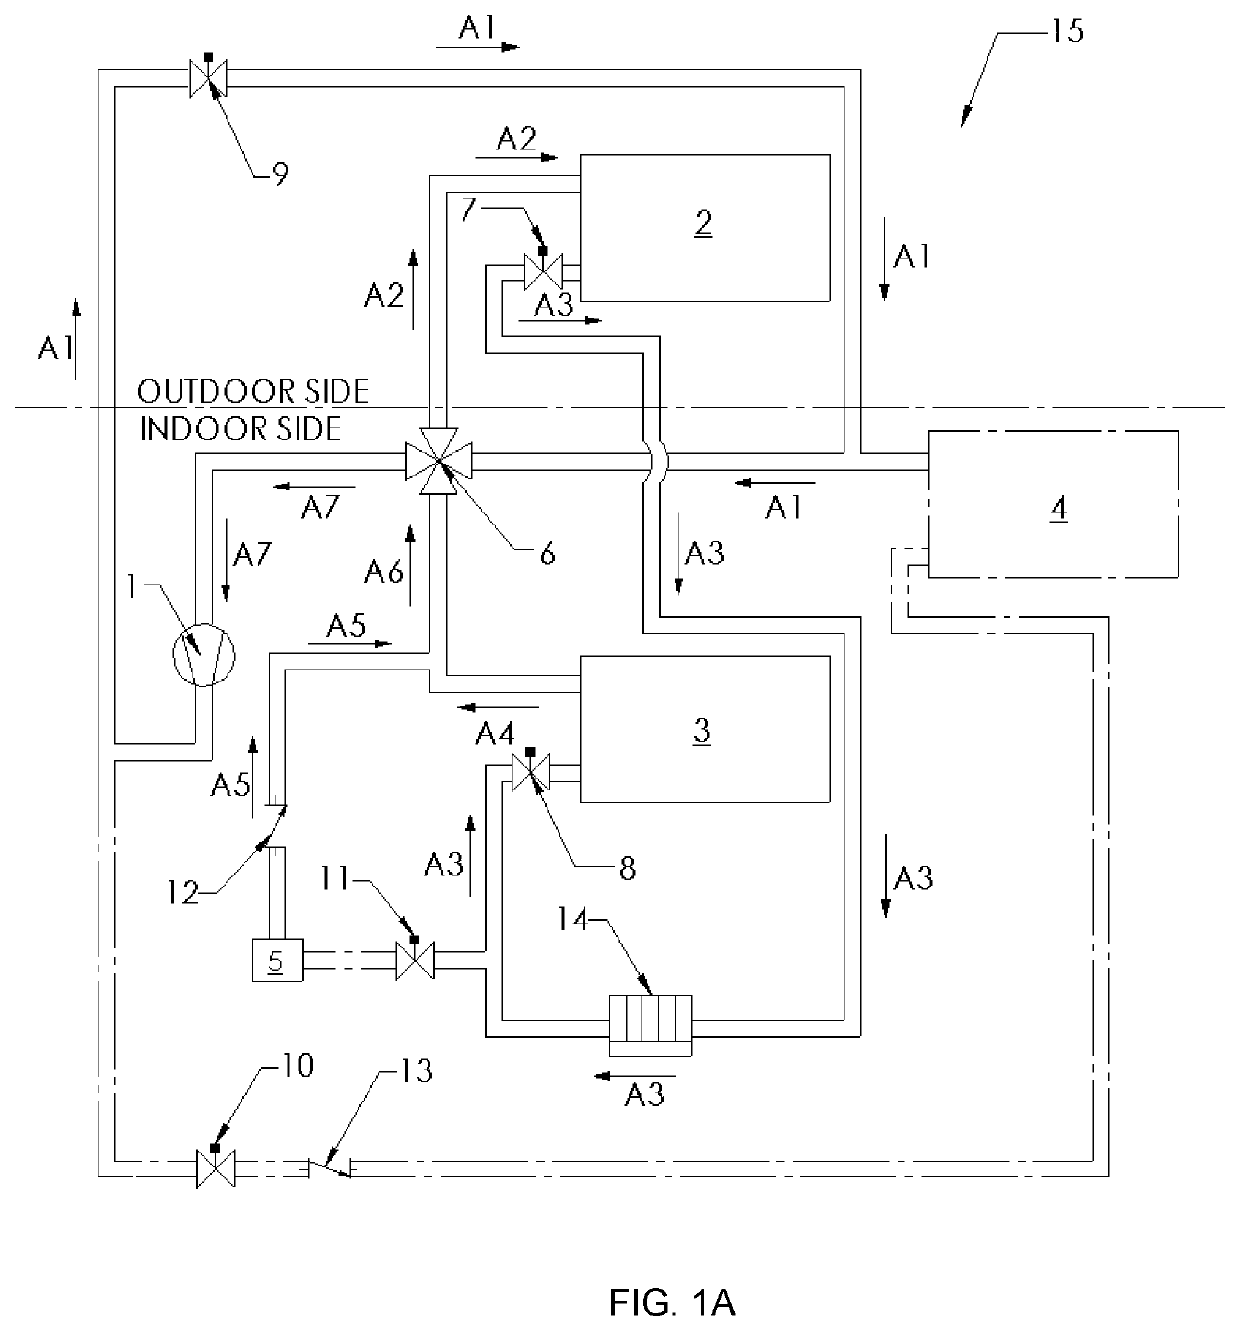 Regrigerant charge control system for heat pump systems